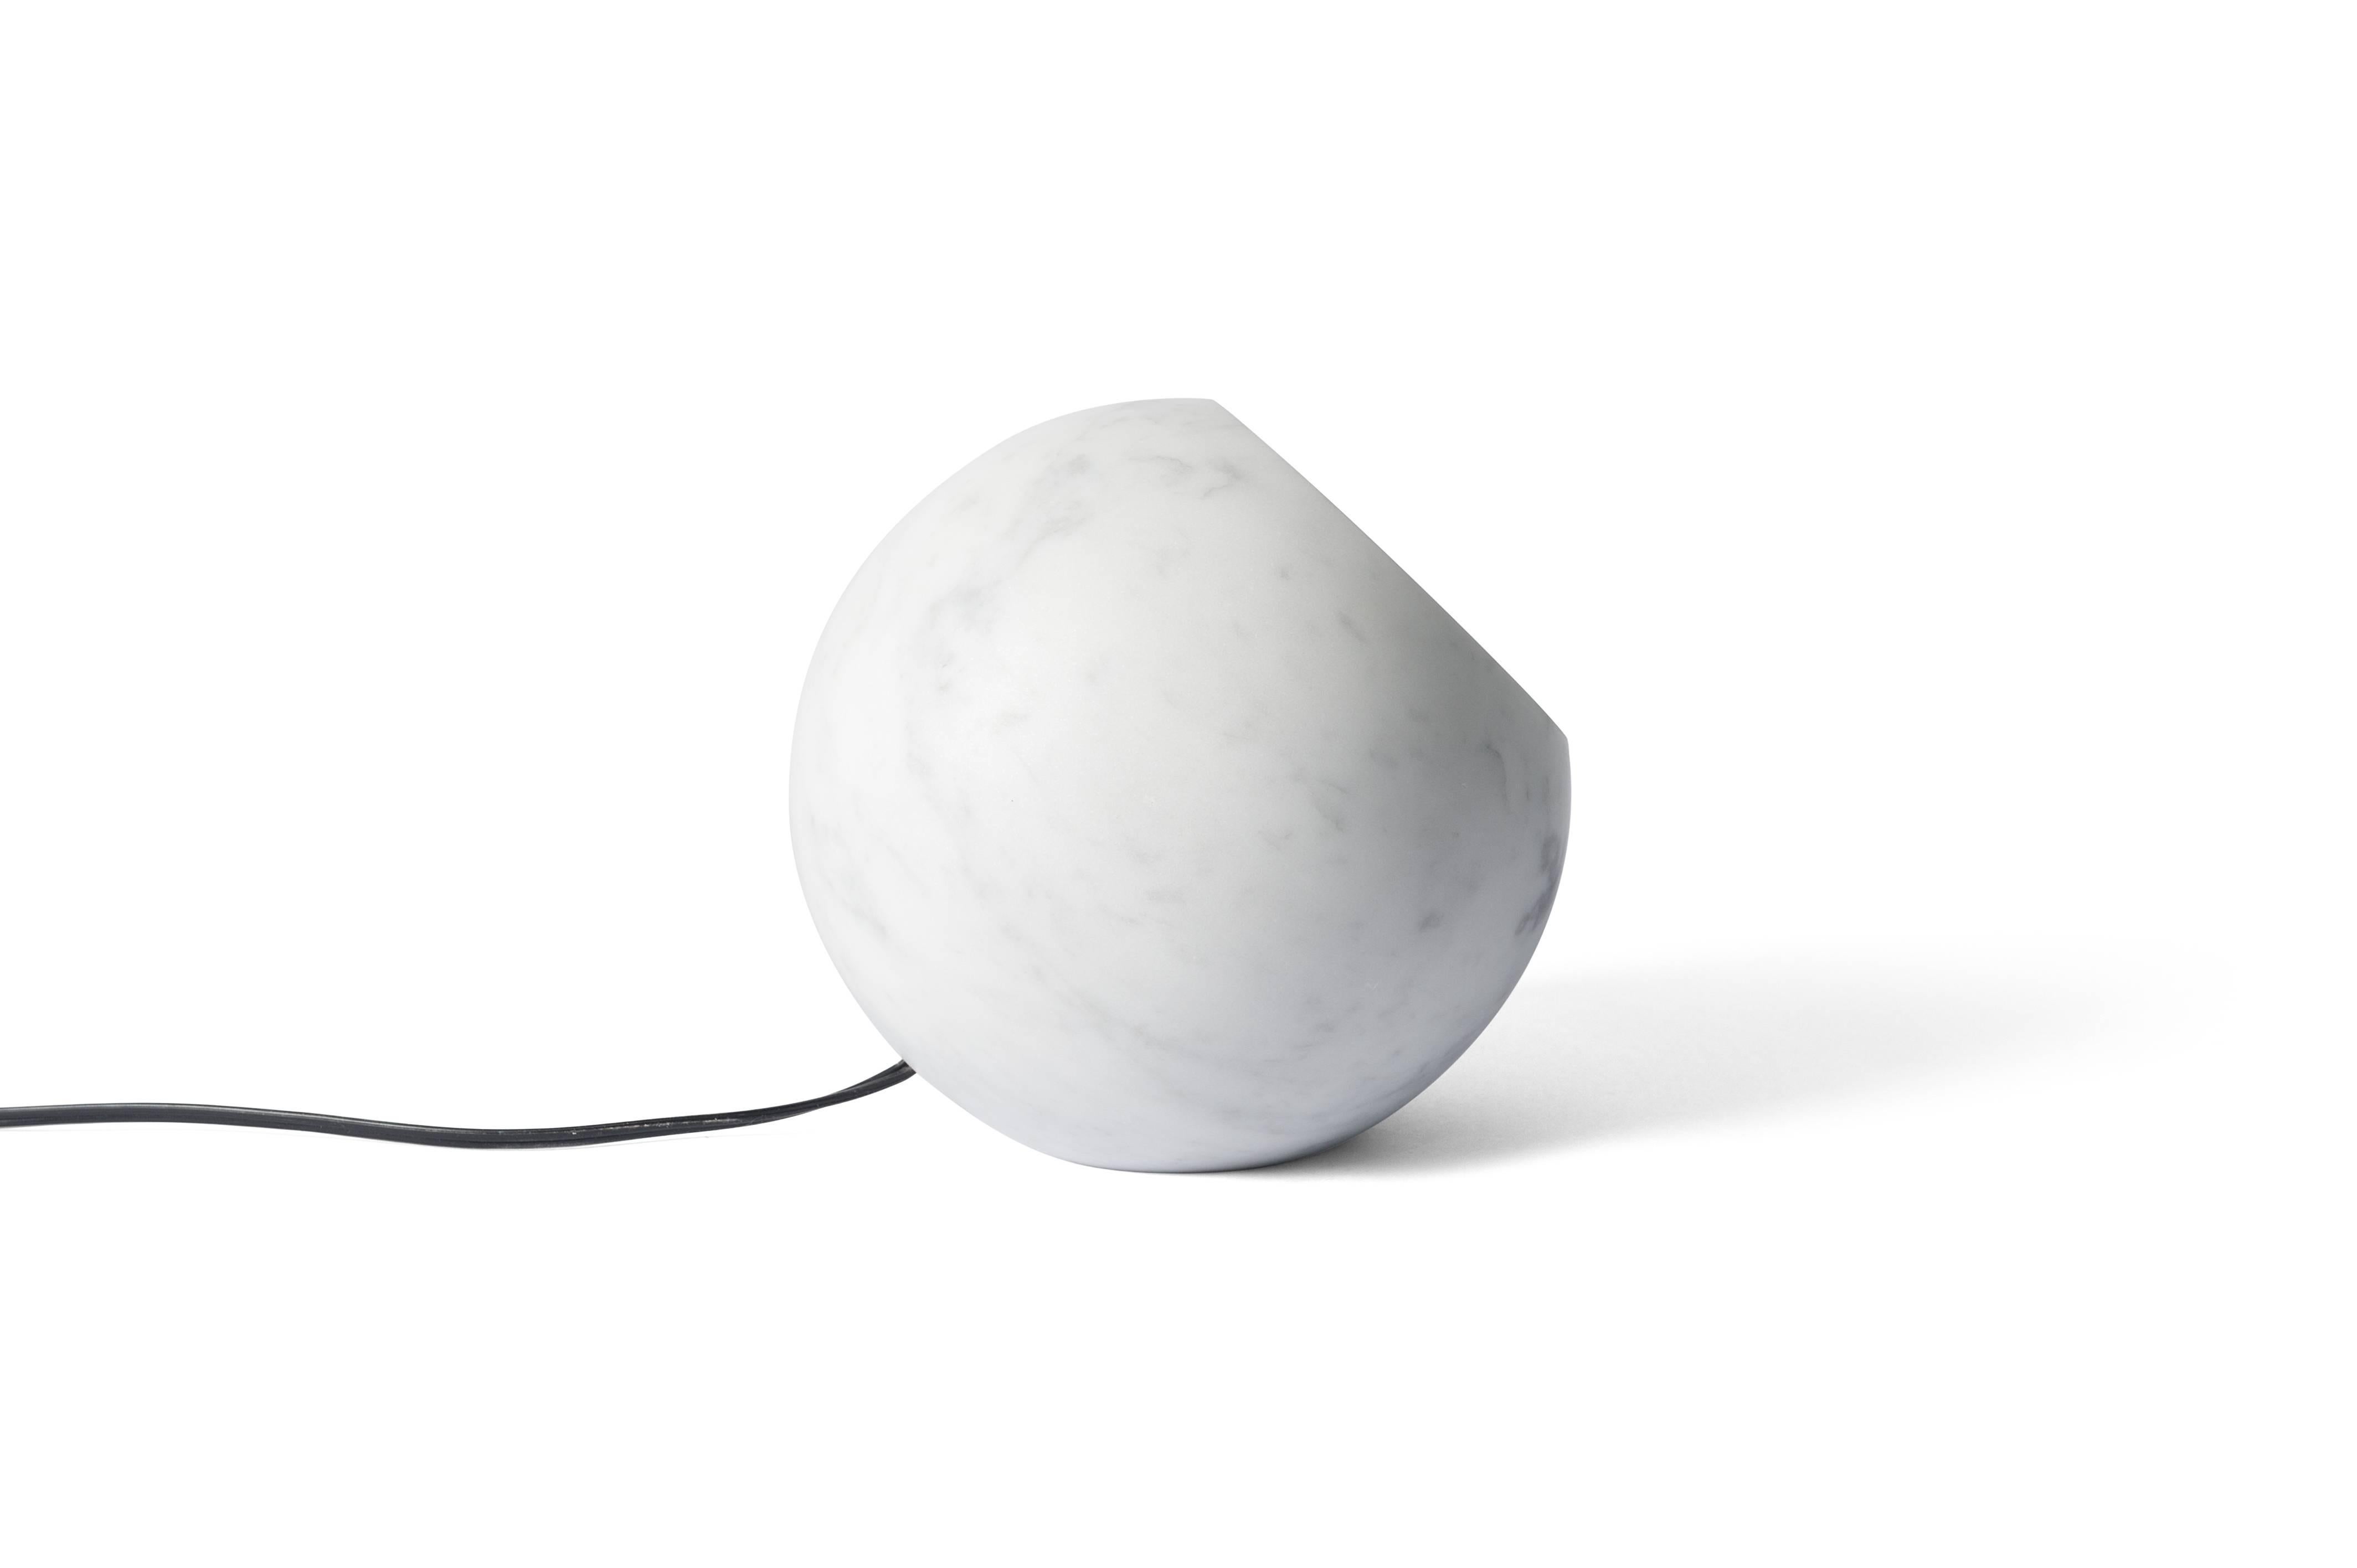 Salvatori Urano Spherical Table Lamp 18 in Bianco Carrara Marble by Elisa Ossino In New Condition For Sale In Querceta, IT